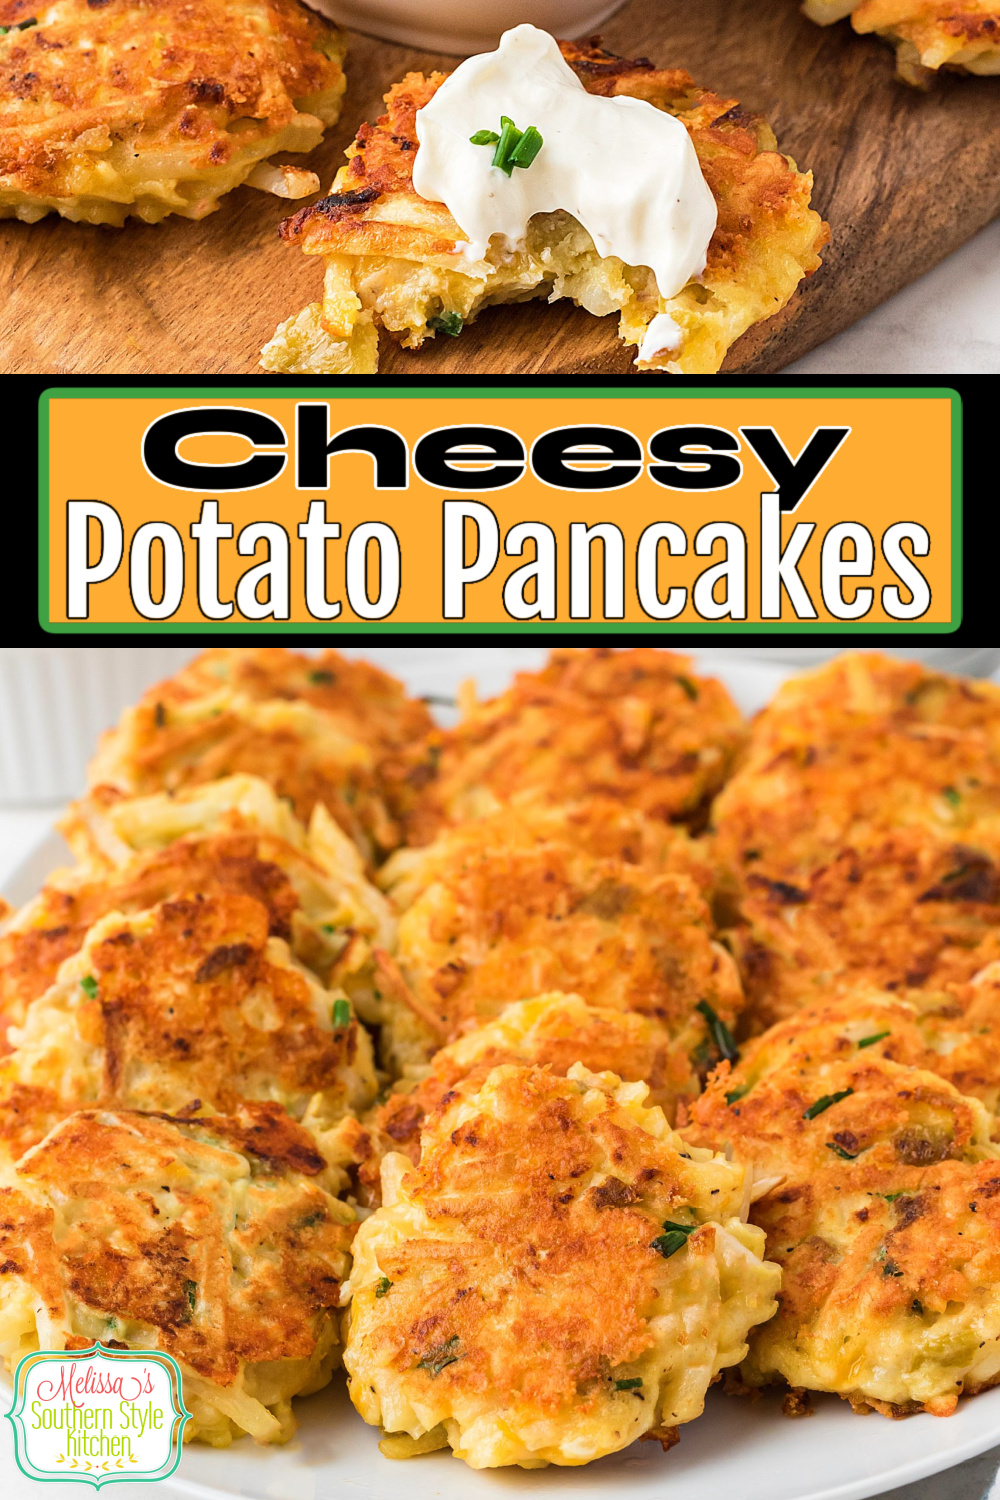 Serve these crispy Cheesy Potato Pancakes warm with a dollop of ranch sour cream as an appetizer or a side dish at any meal #potatopancakes #potatoes #latkes #potatocakes #easypotatocakes #potatoes #potatorecipes #cheesypotatopancakes via @melissasssk